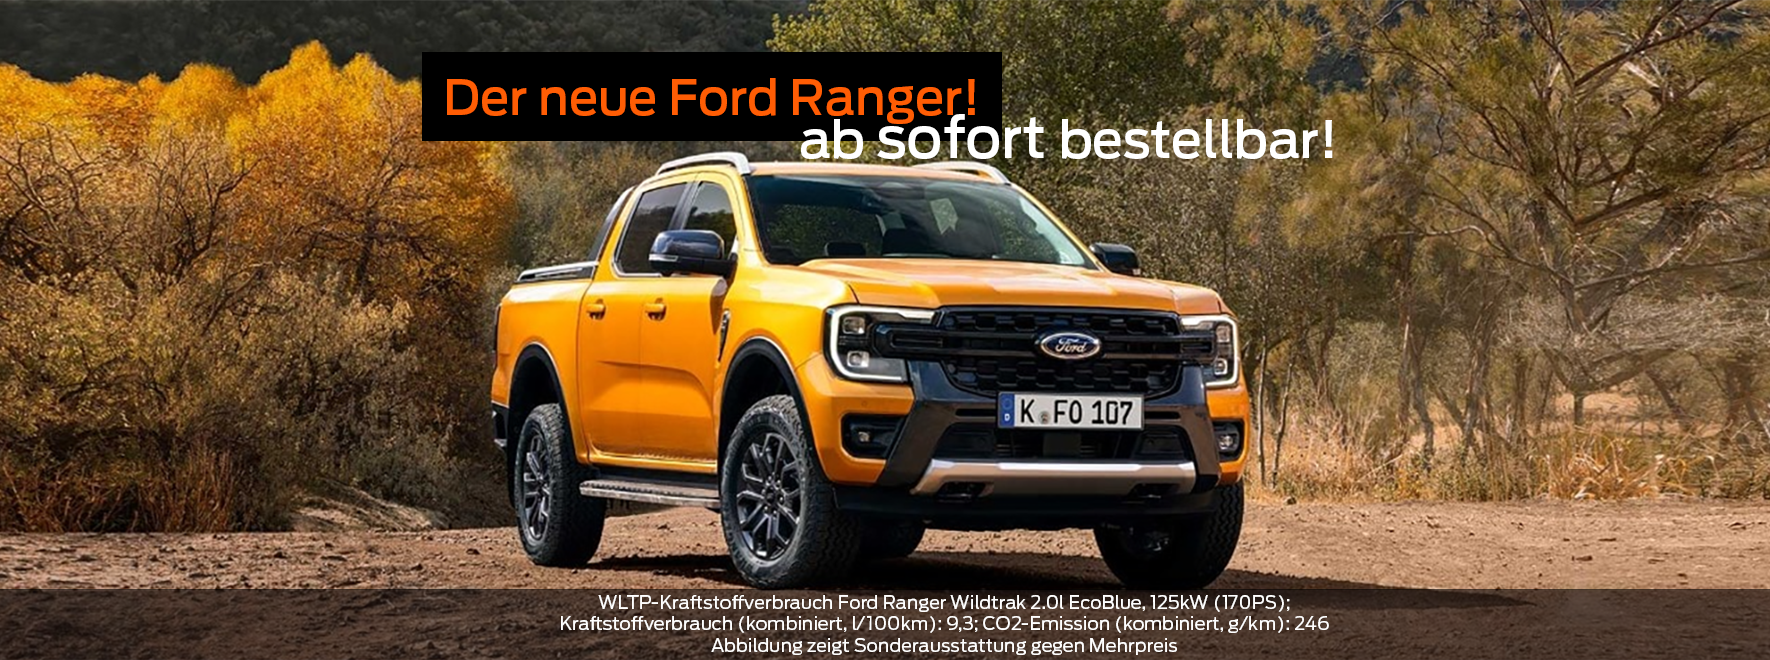 FORD RANGER LIMITED | 2.0l Ecoblue, 125 kW (170 PS), 6-Gang-Automatikgetriebe